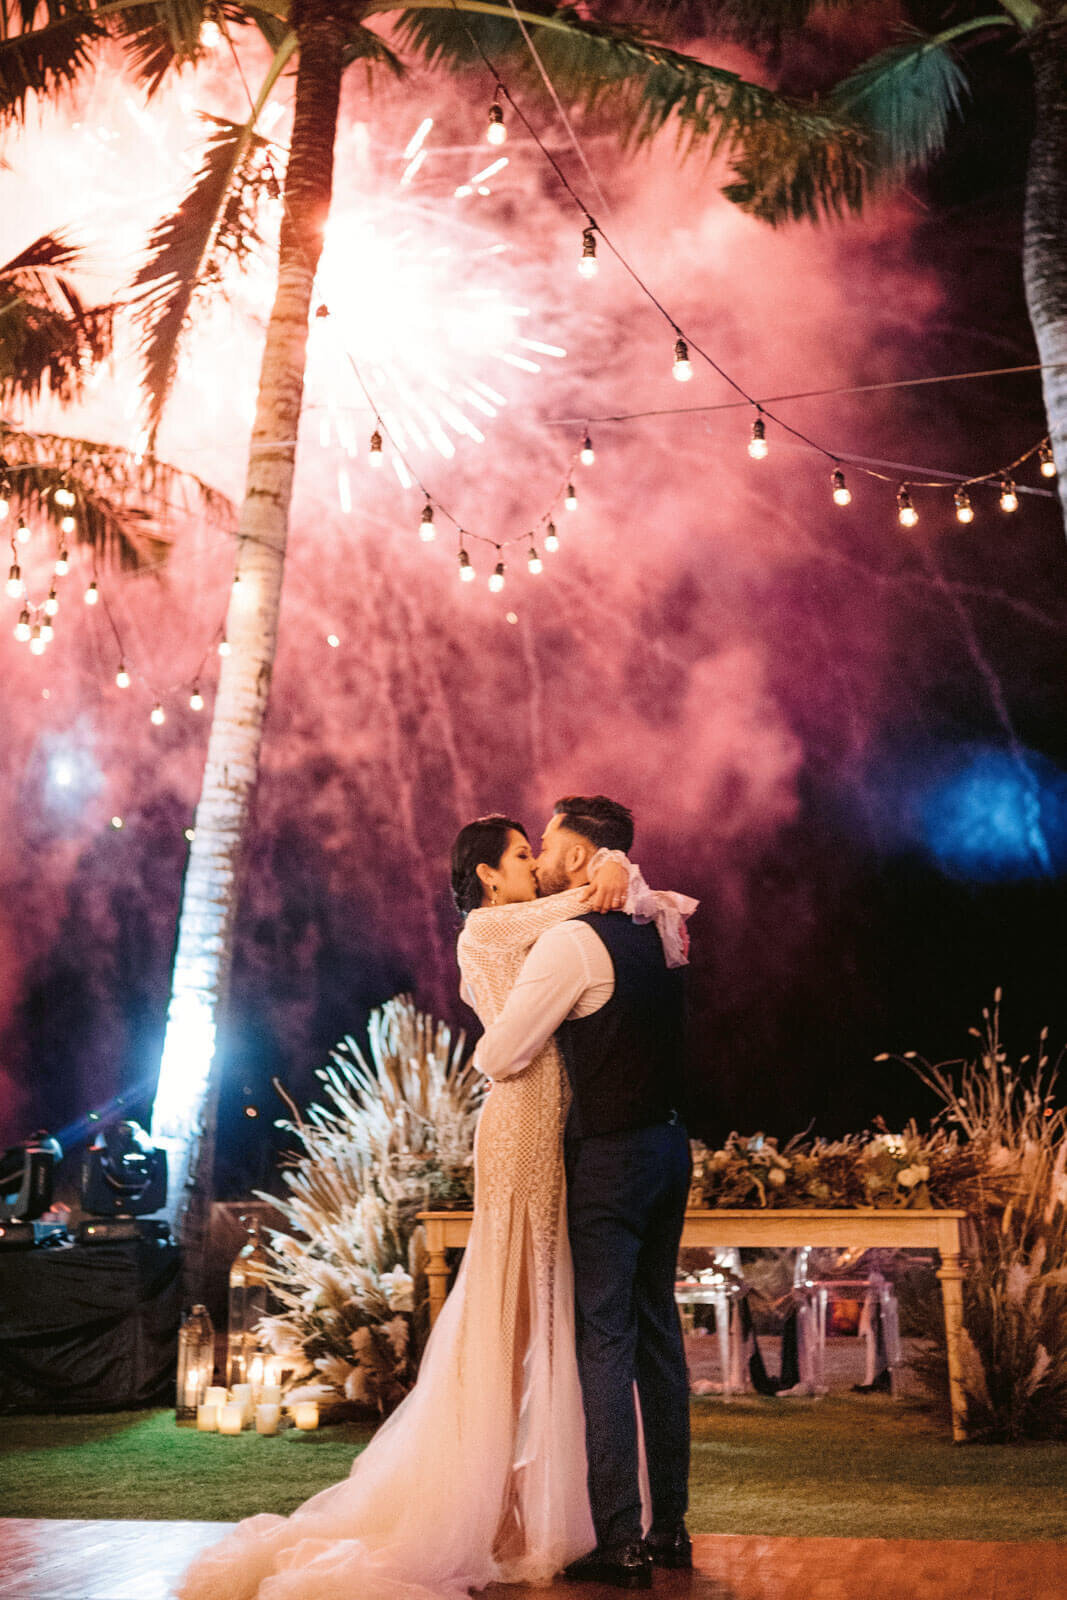 The bride and groom kiss in a wedding reception, with fireworks in the background in Bali, Indonesia. Image by Jenny Fu Studio